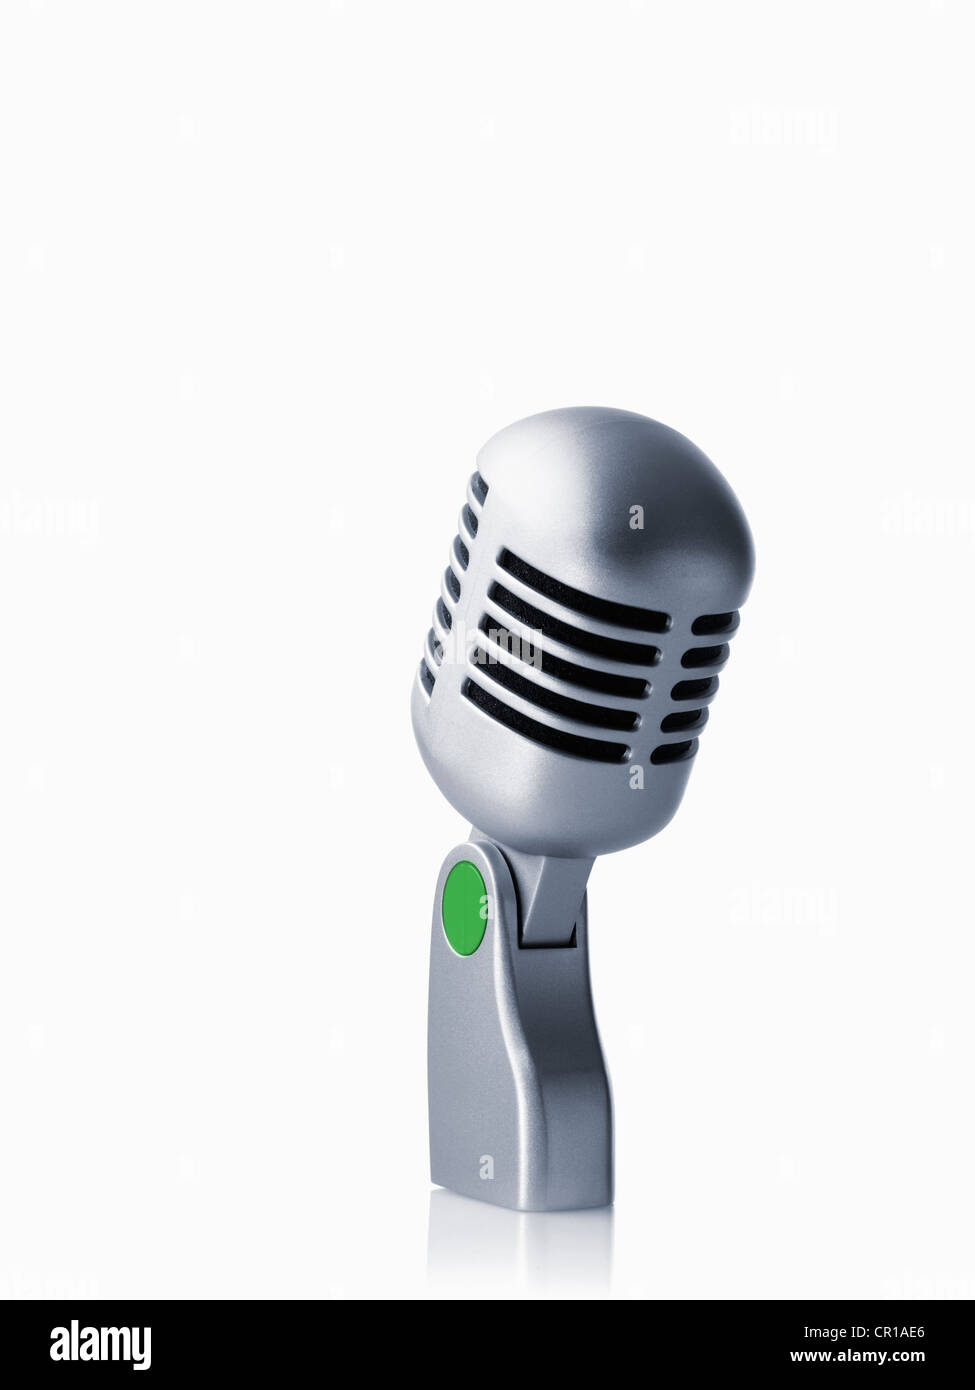 Studio shot of vintage-themed modern microphone on white background Stock Photo